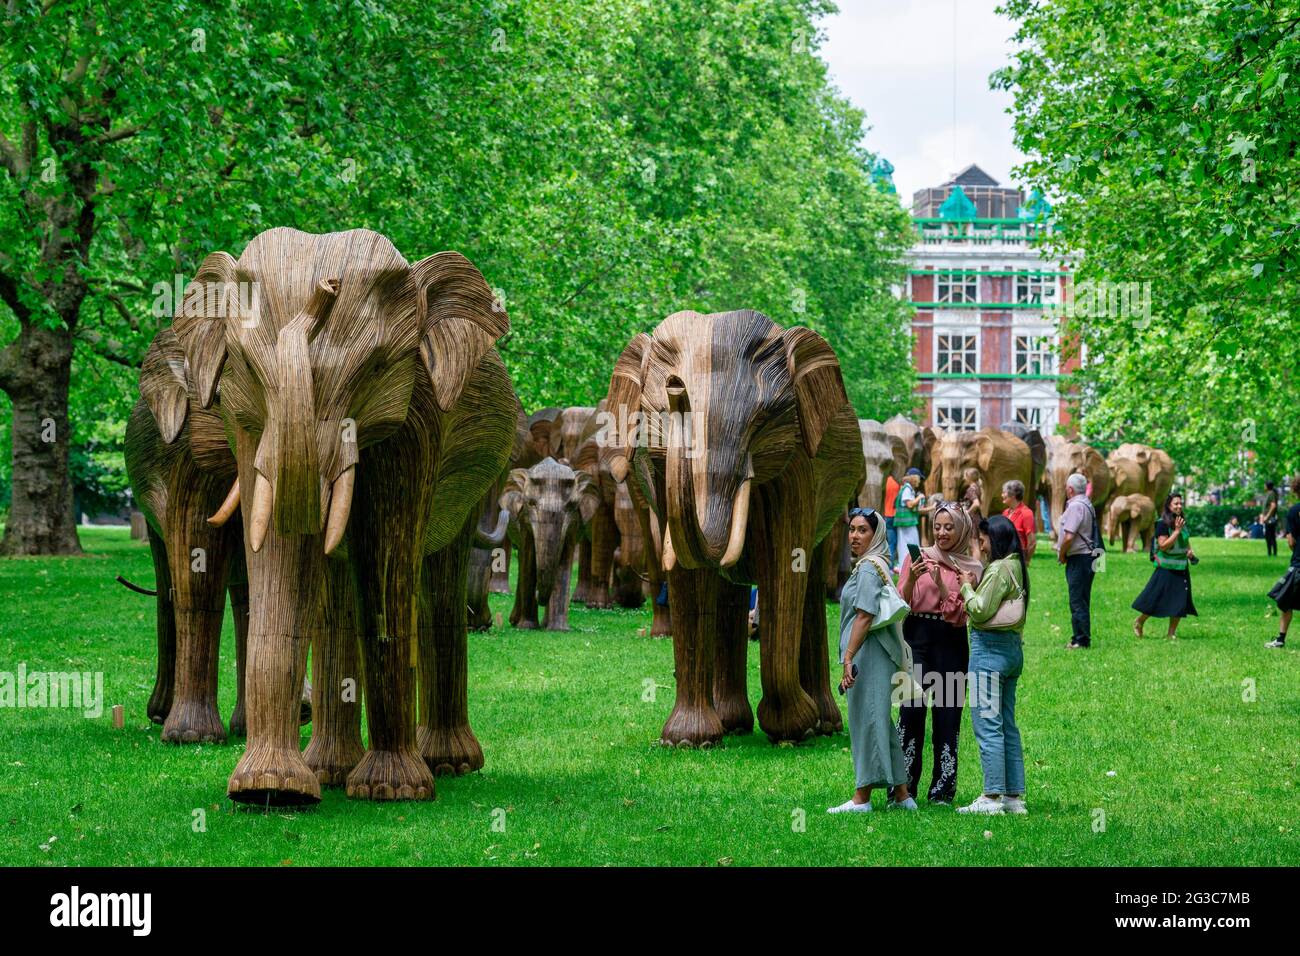 London Uk 15th June 2021 People Visiting The Coexistence Lantana Elephants In Green Park In